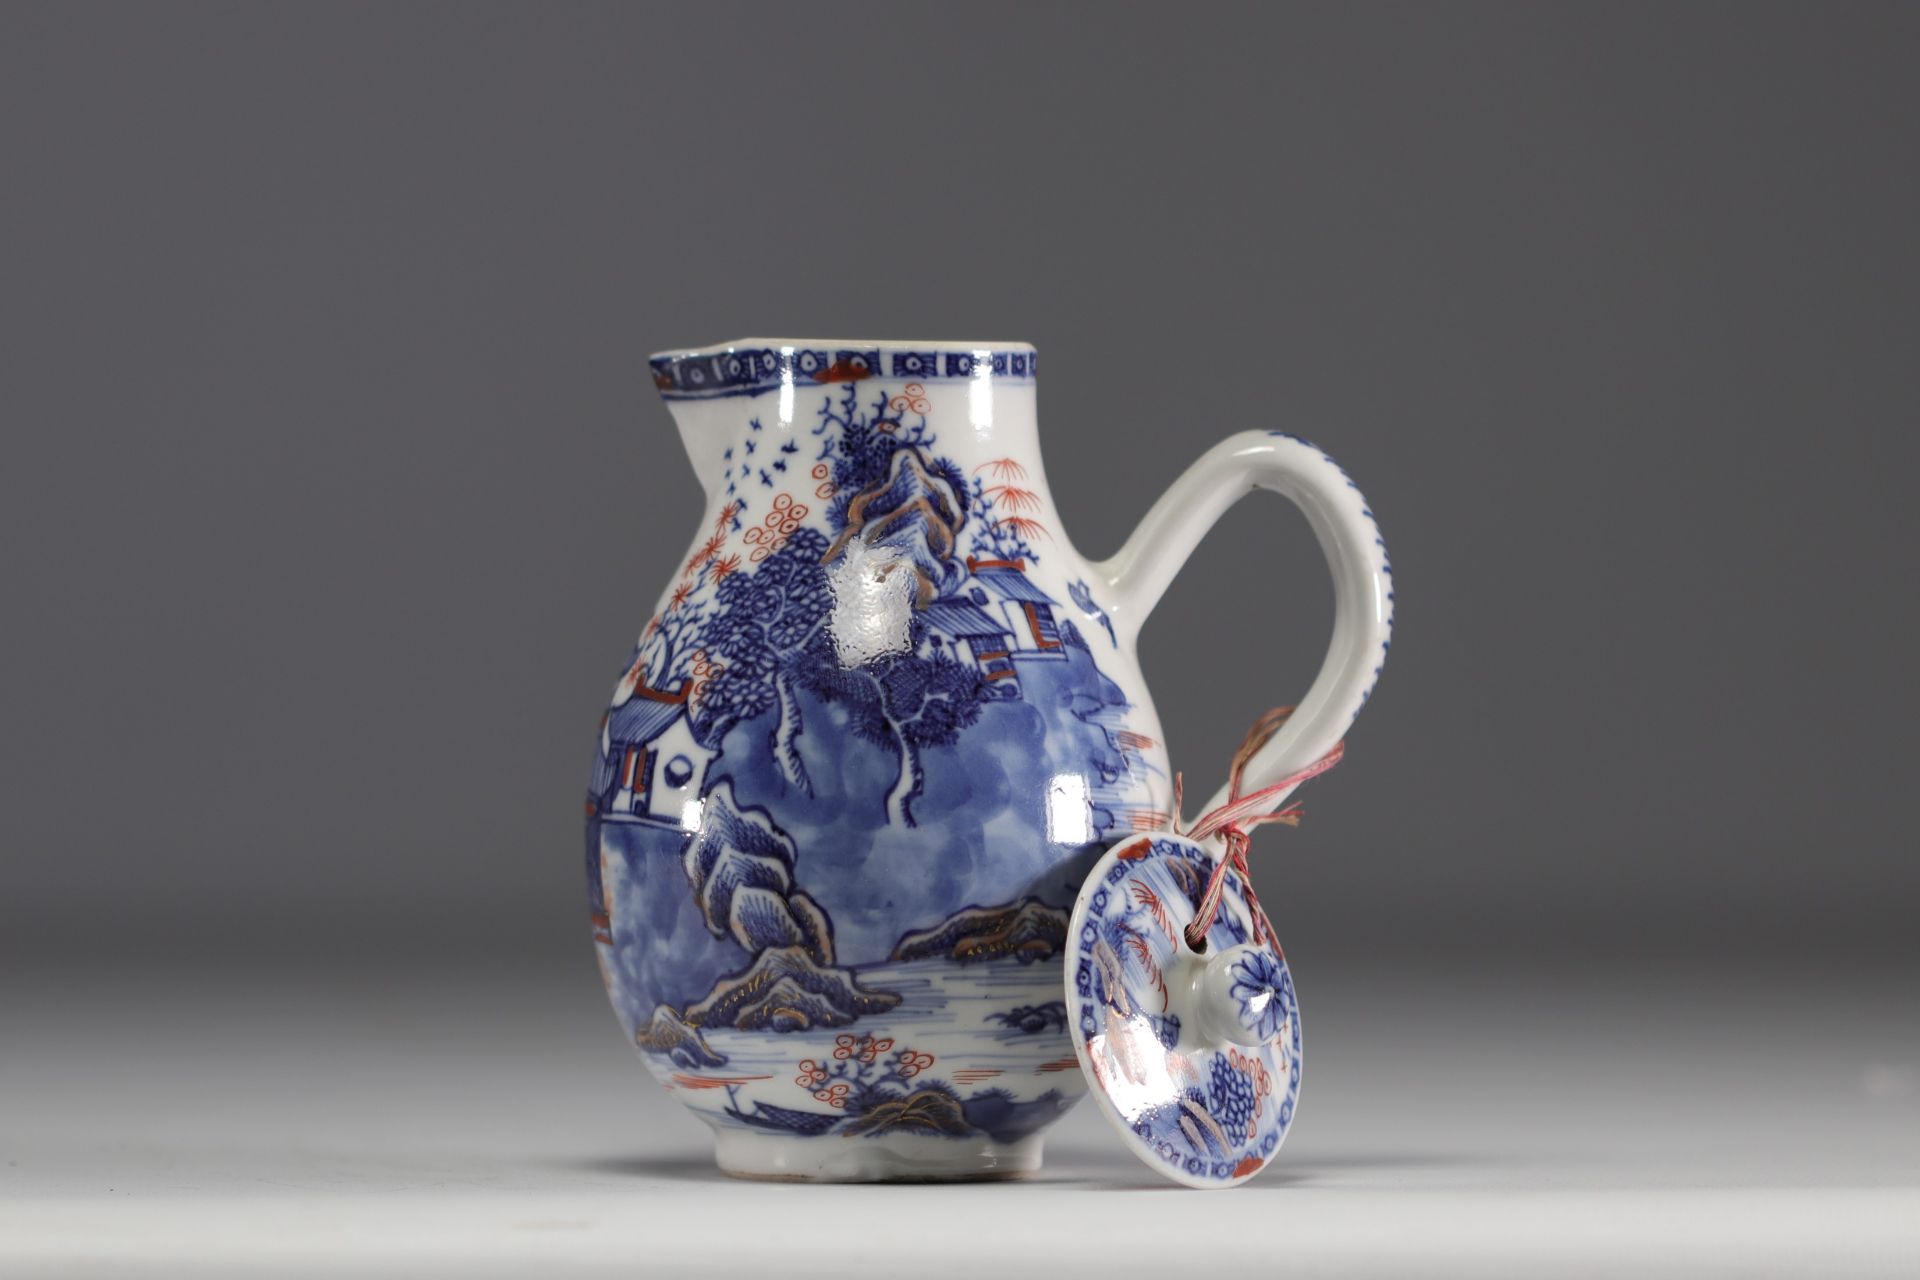 China - white, blue and red porcelain pot decorated with landscapes and figures, Qing period. - Image 2 of 5